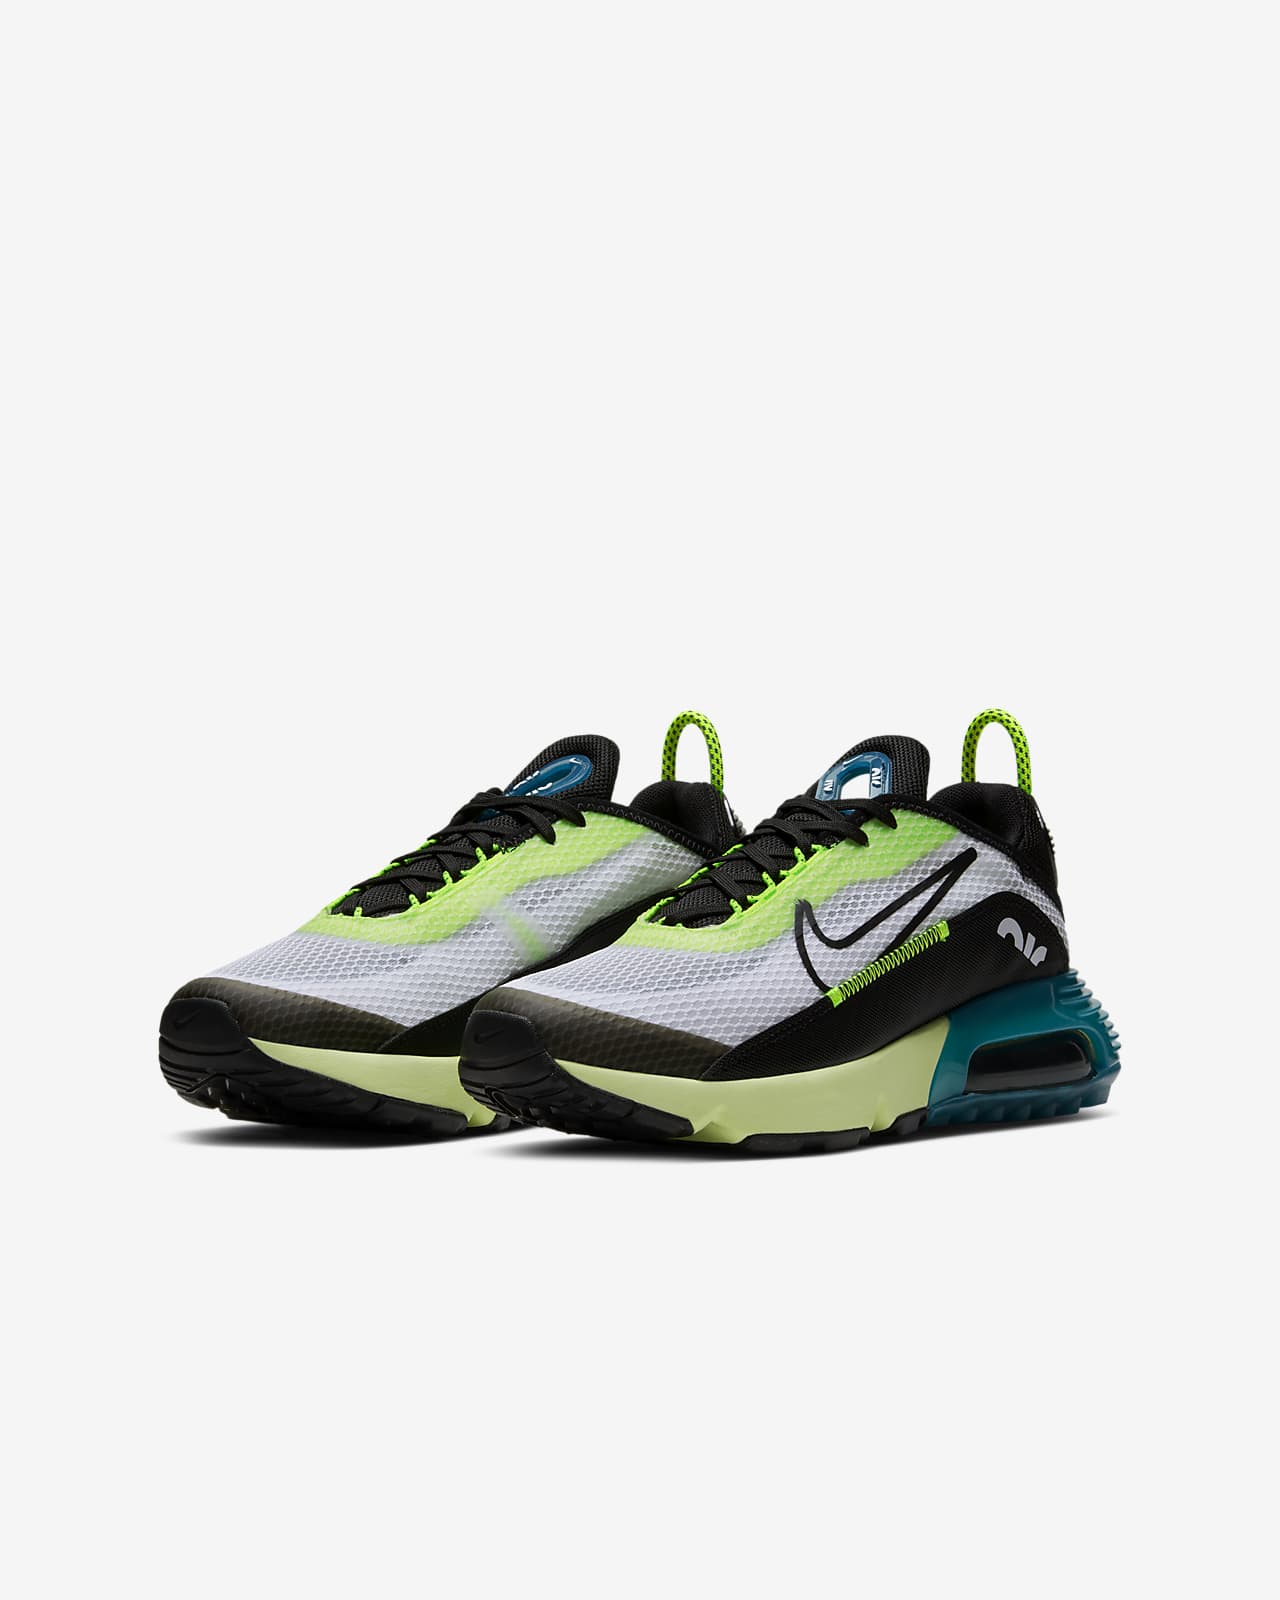 when did nike air max 2090 come out